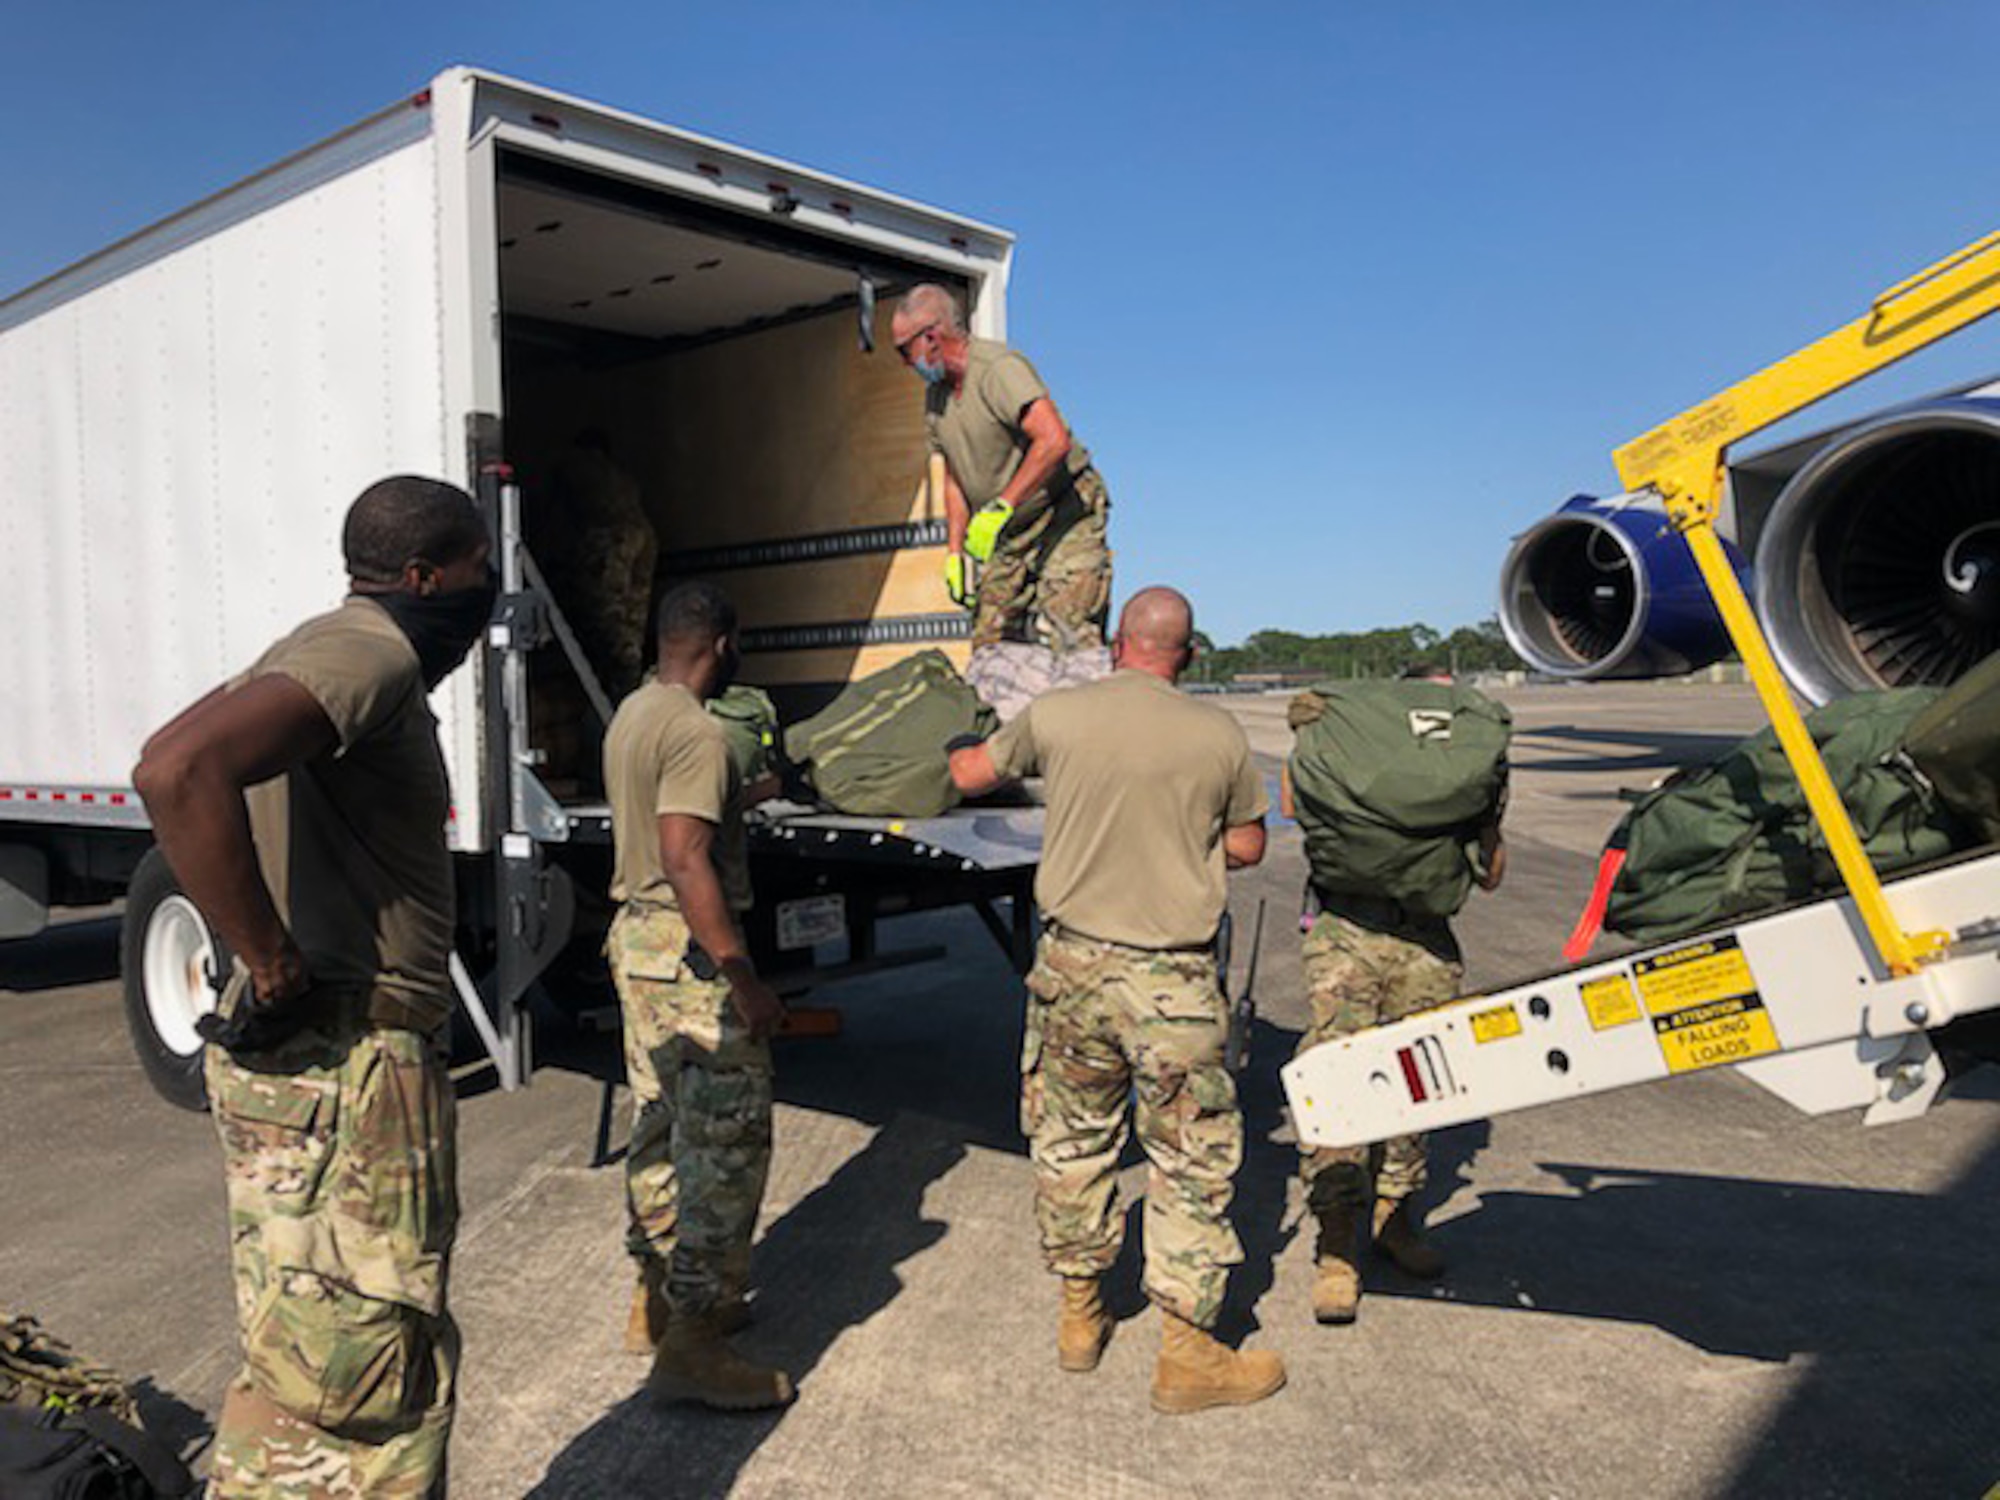 Members of the Air National Guard and the 403rd Wing work together loading bags onto the airplane with the deployers at Camp Gulfport, which is located at the Gulfport Combat Readiness Training Center, where one Restriction of Movement operation was set up in order to prevent the spread of COVID-19. ROMs were put into effect before all deployments start, in order to ensure the safety of service members in the U.S. Central, Africa, and European Commands area of responsibilty. (U.S. Air Force photo by Lt. Col. Shawn Baldy)